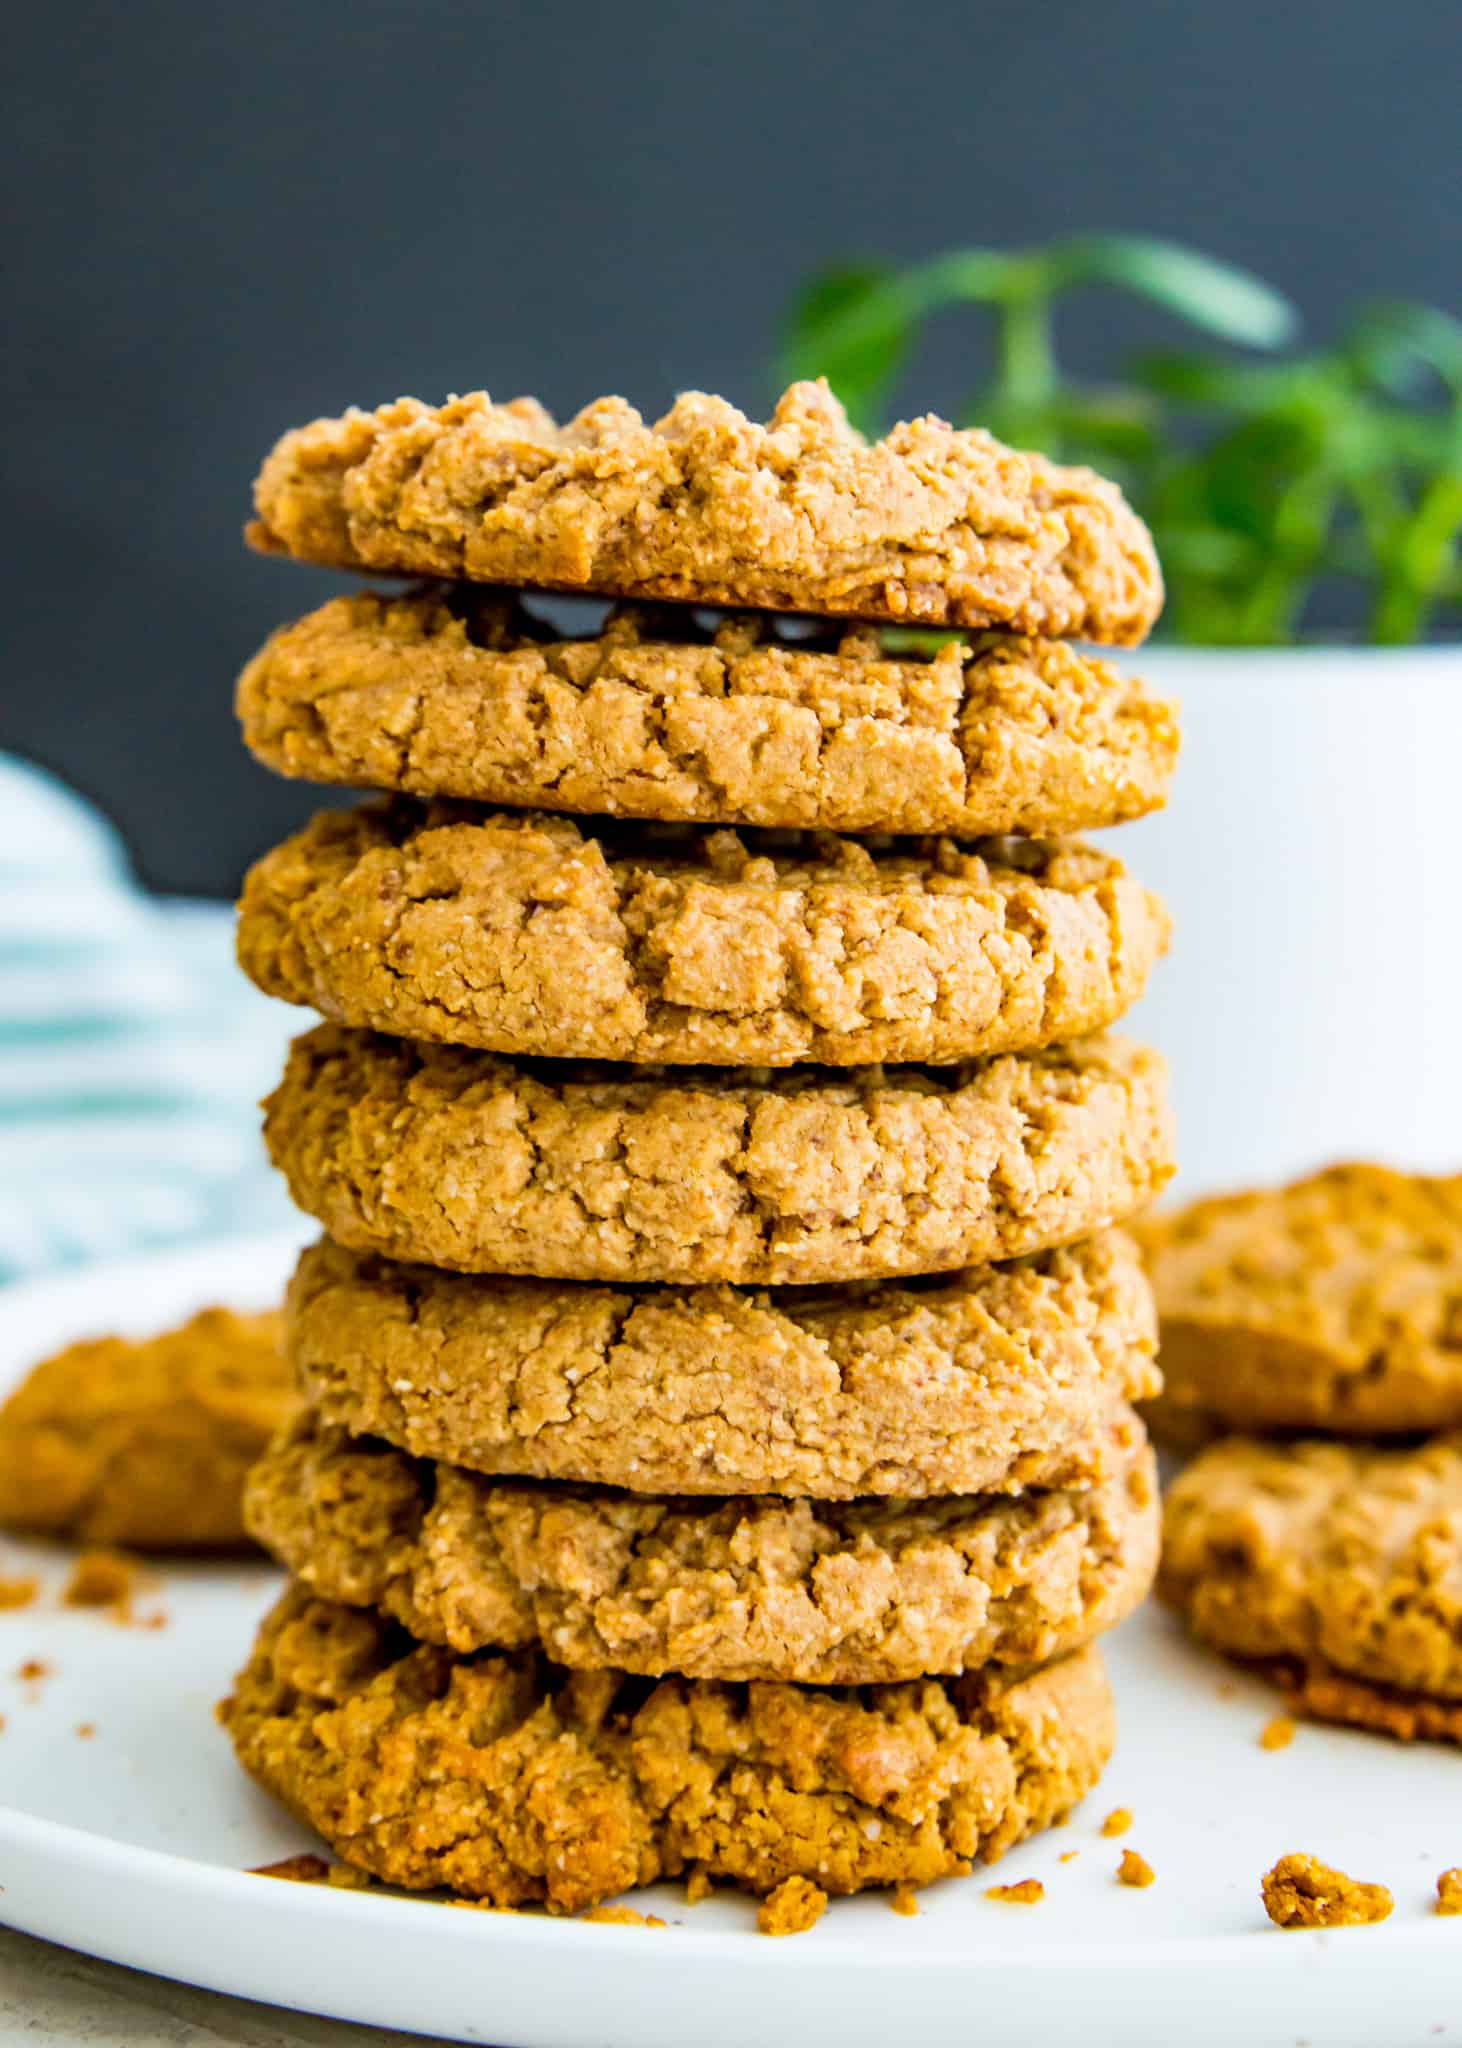 A stack of peanut butter cookies made with almond flour